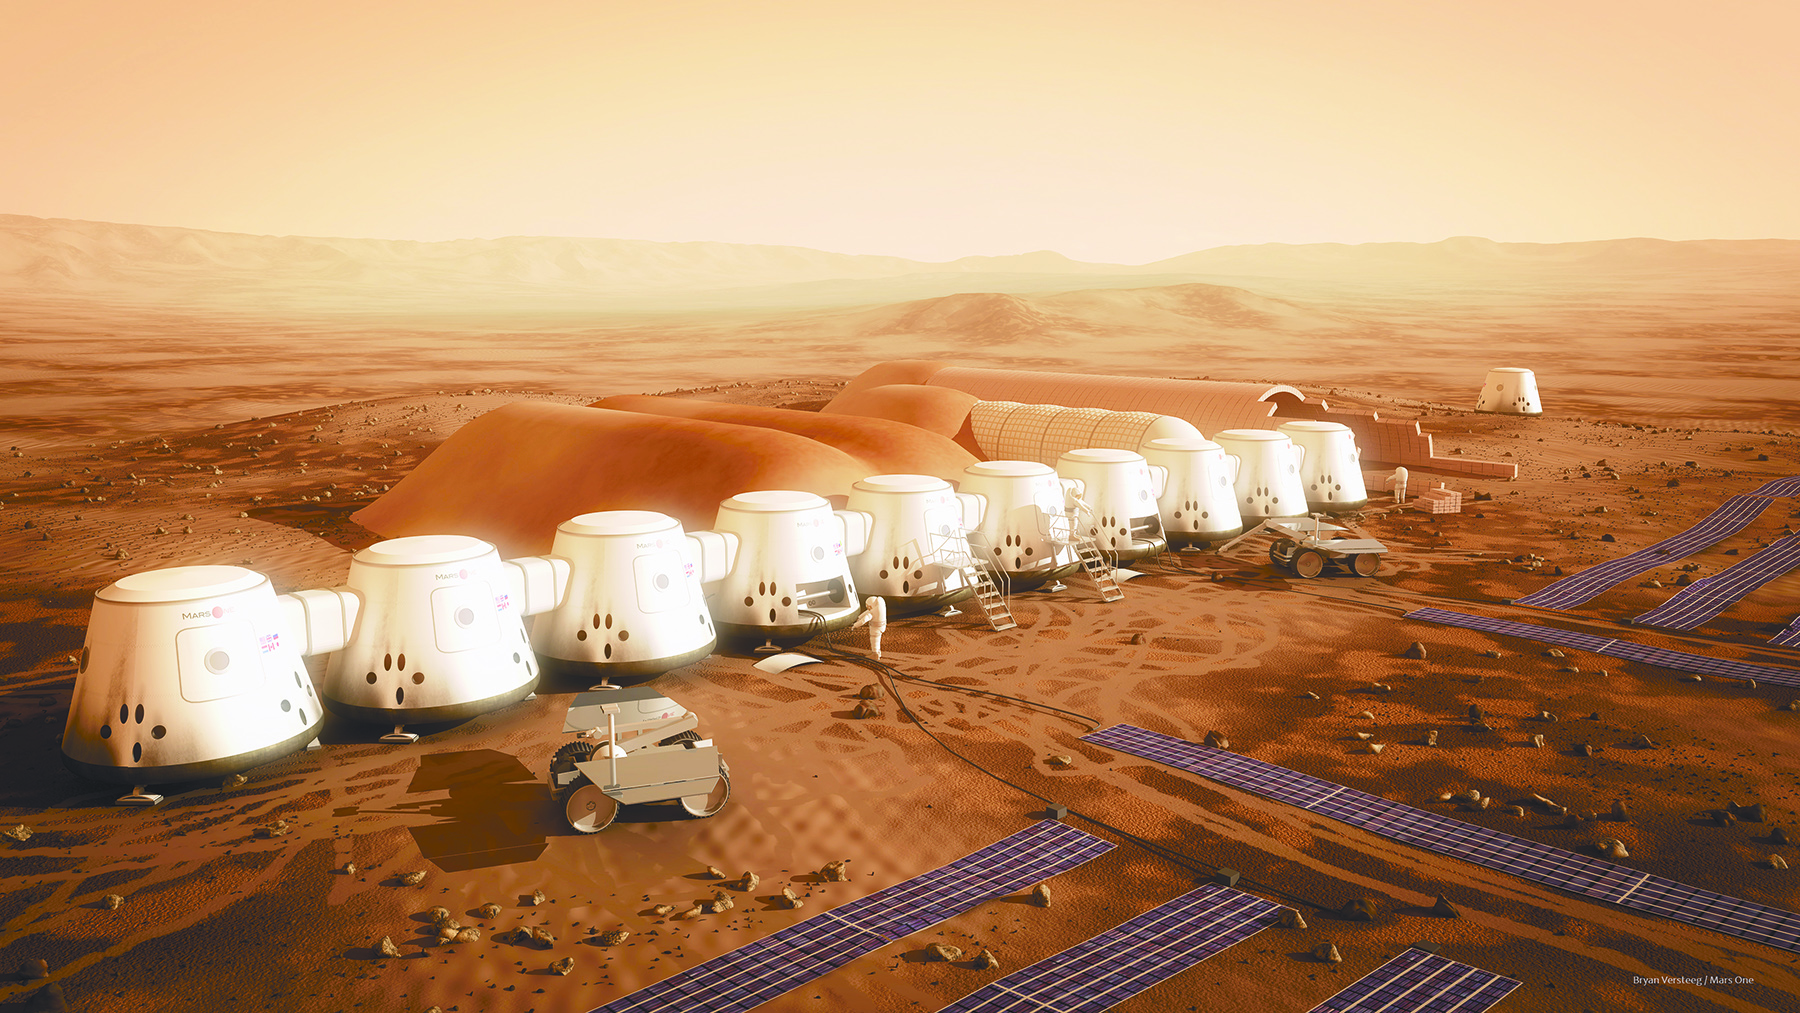 Mars One’s new Martians would be preceded by six cargo units containing the building blocks of an artificial habitat.